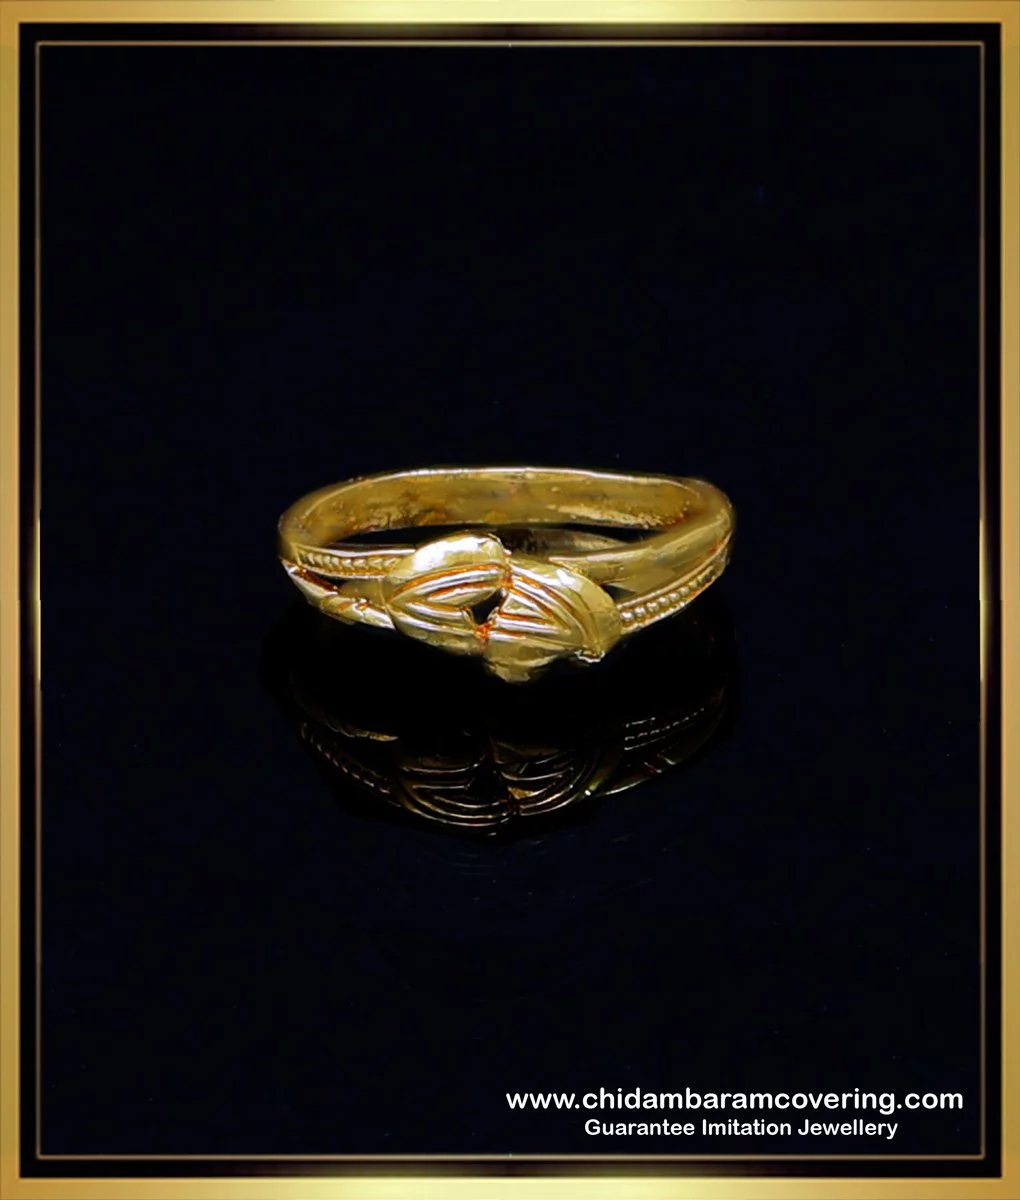 Buy Original Impon Daily Use Ring Dolphin Design Plain Casting Ring Online